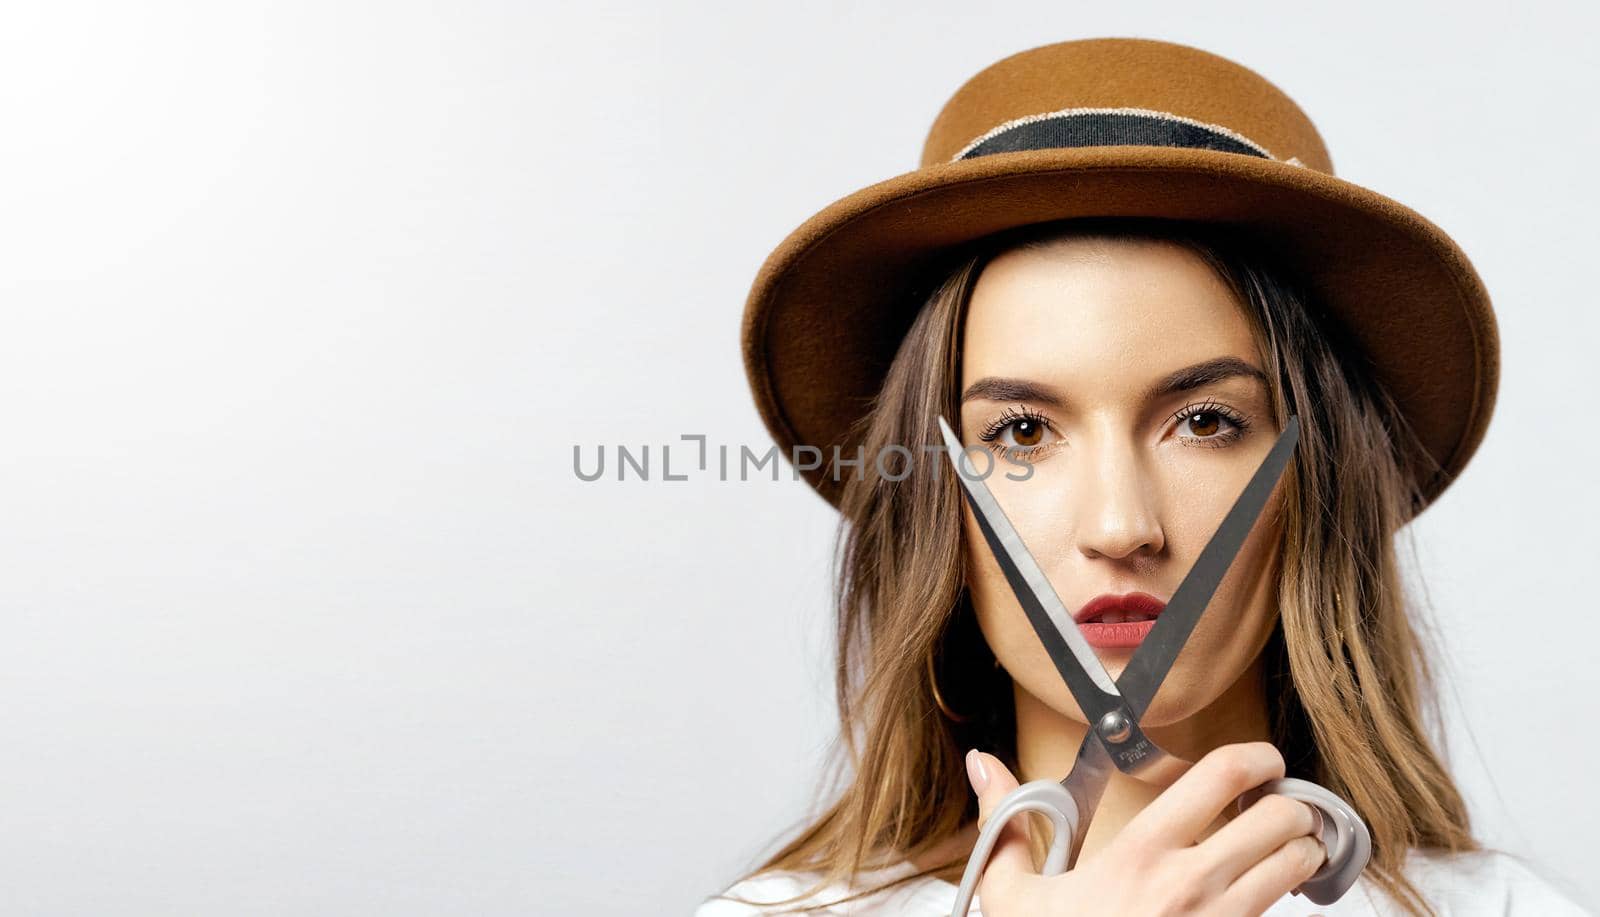 A woman wearing a hat looking through scissors hight quality